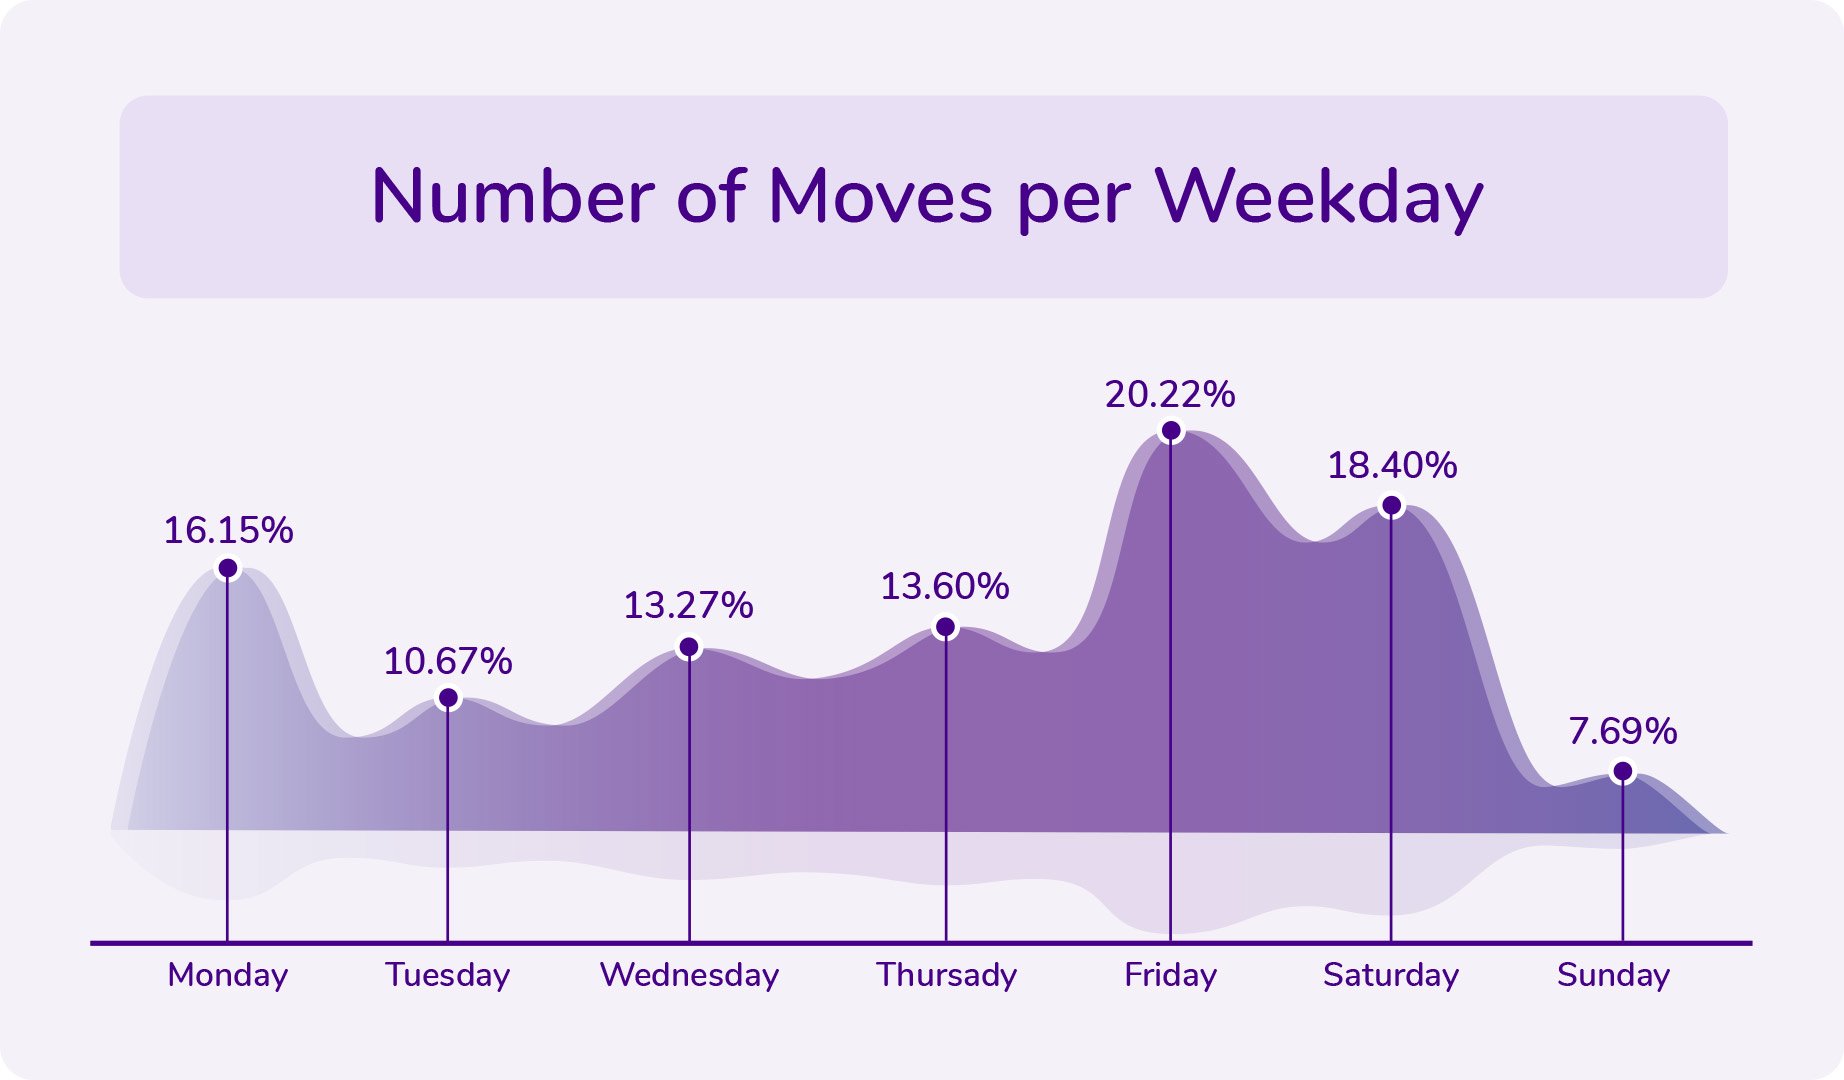 Number of Moves per Weekday